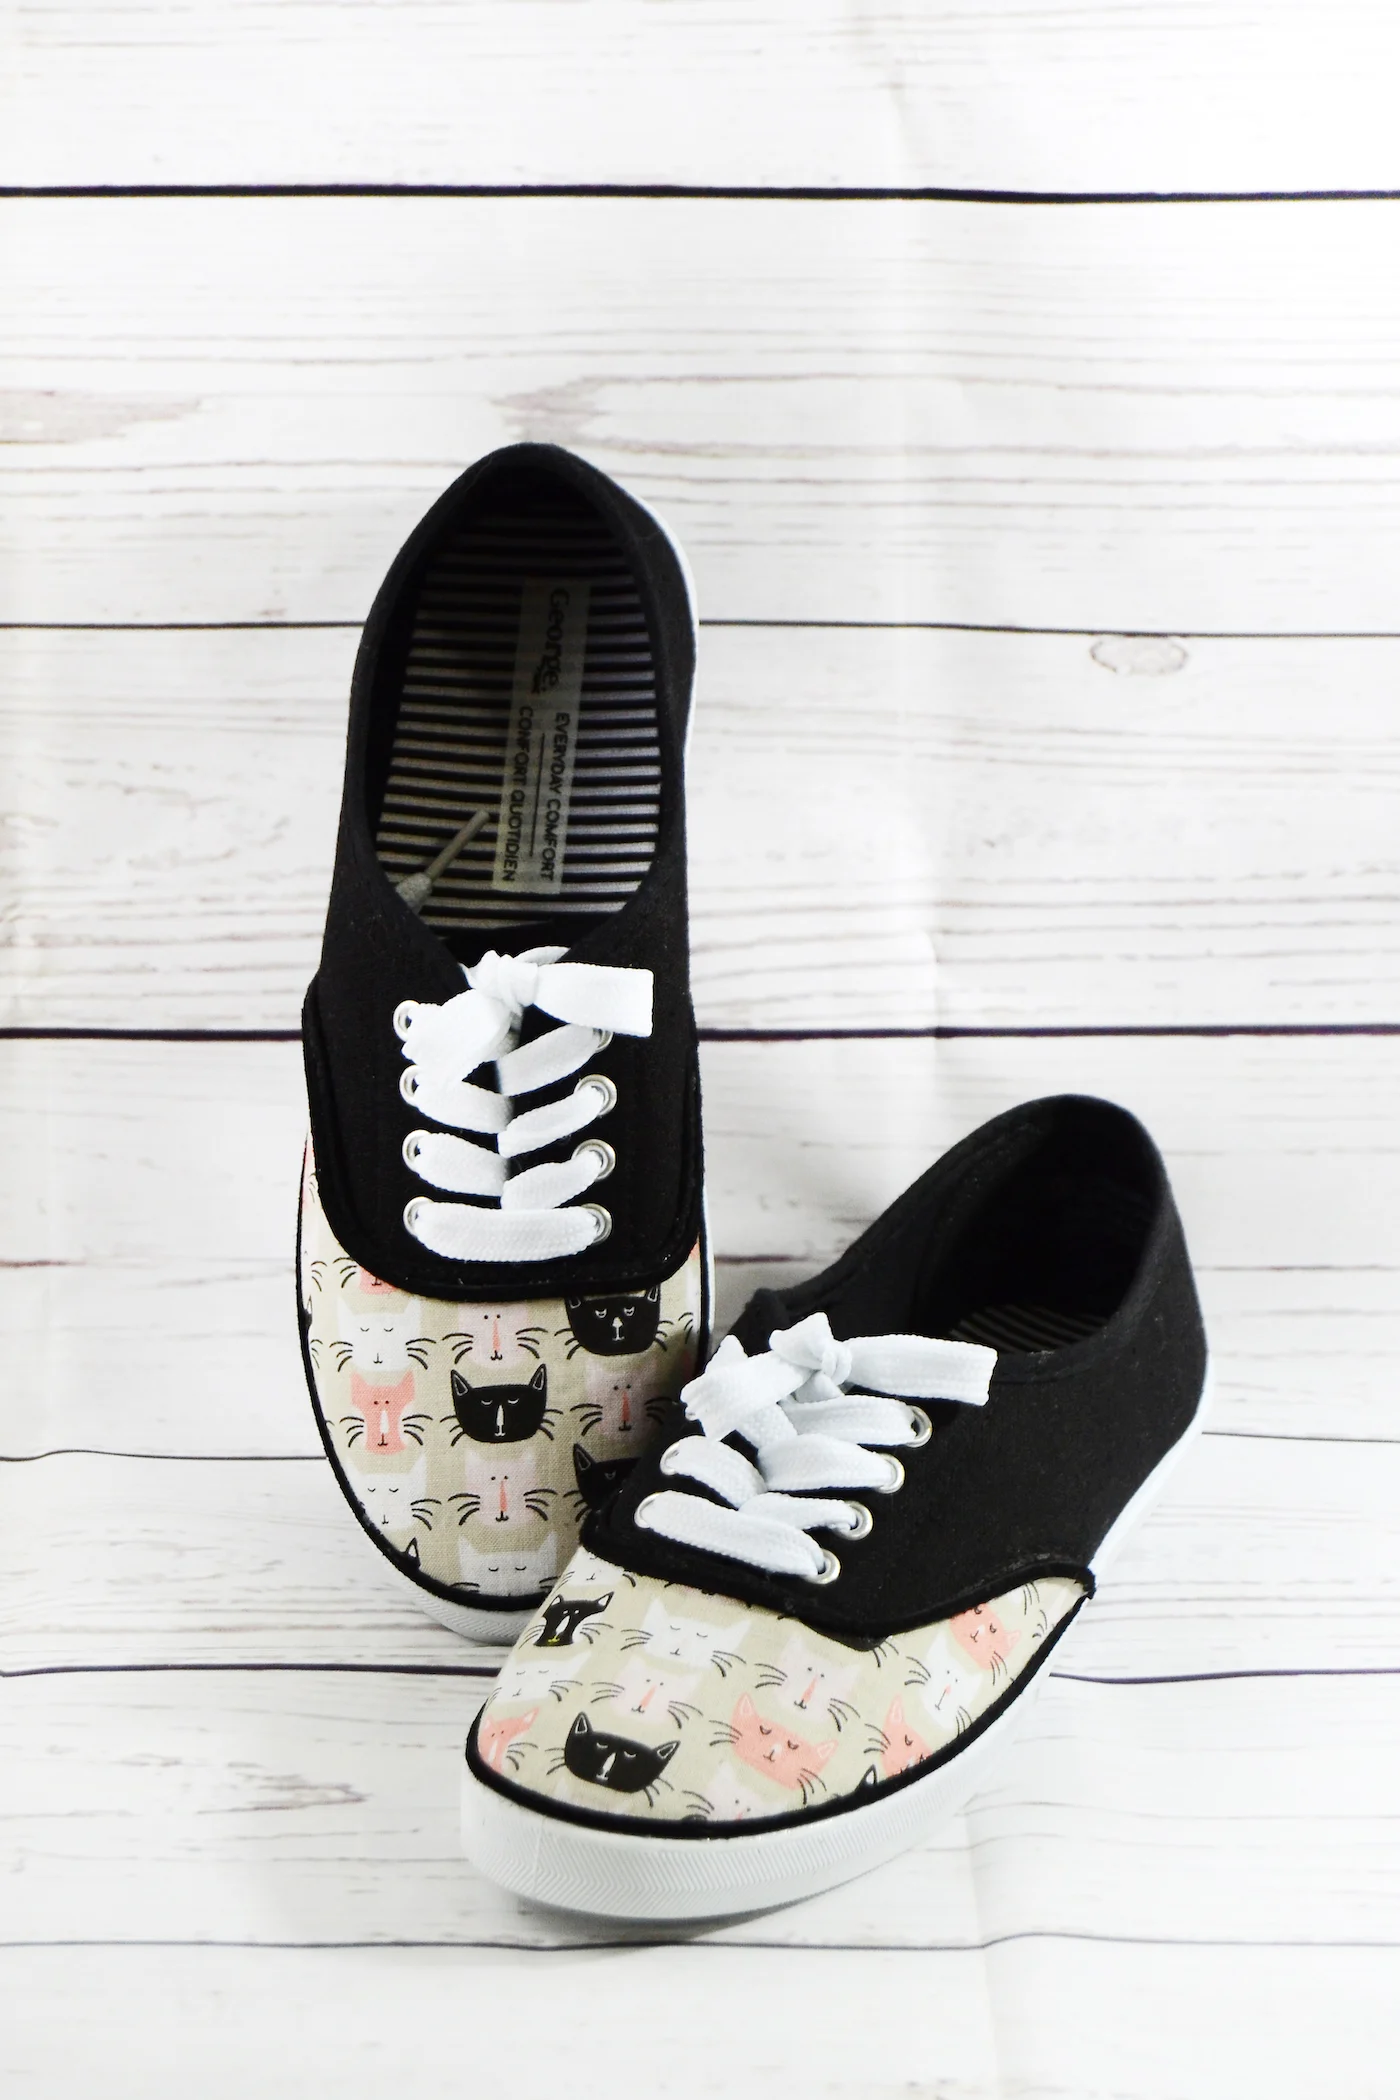 Mod Podge shoes with fabric